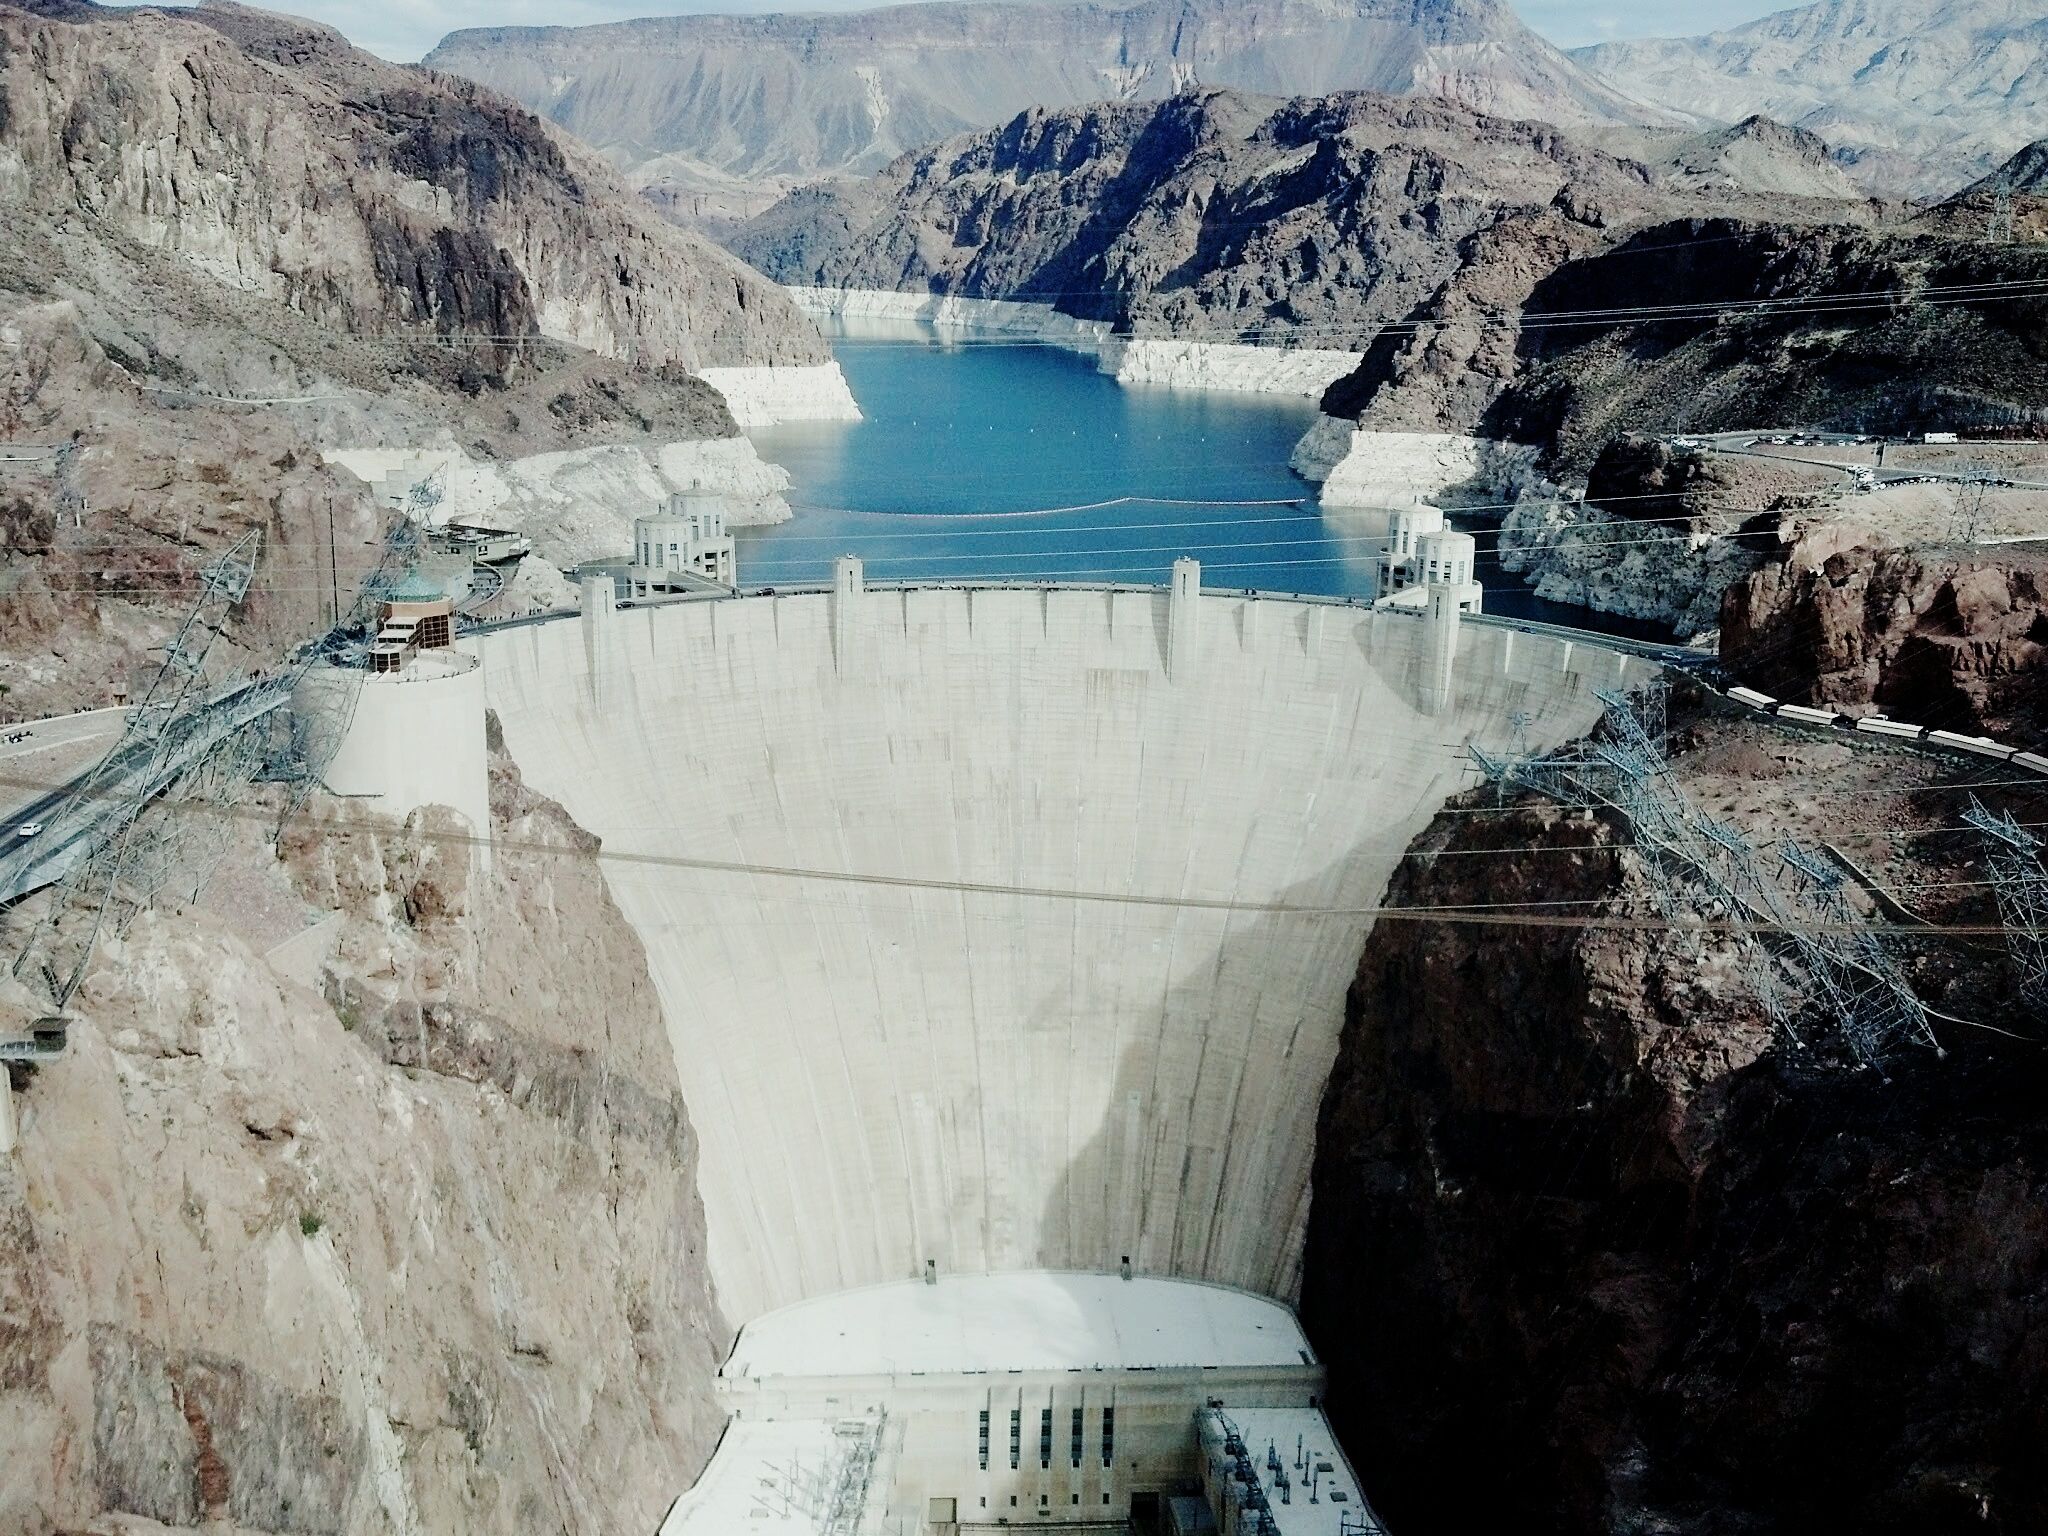 An Overview of Visiting the Hoover Dam